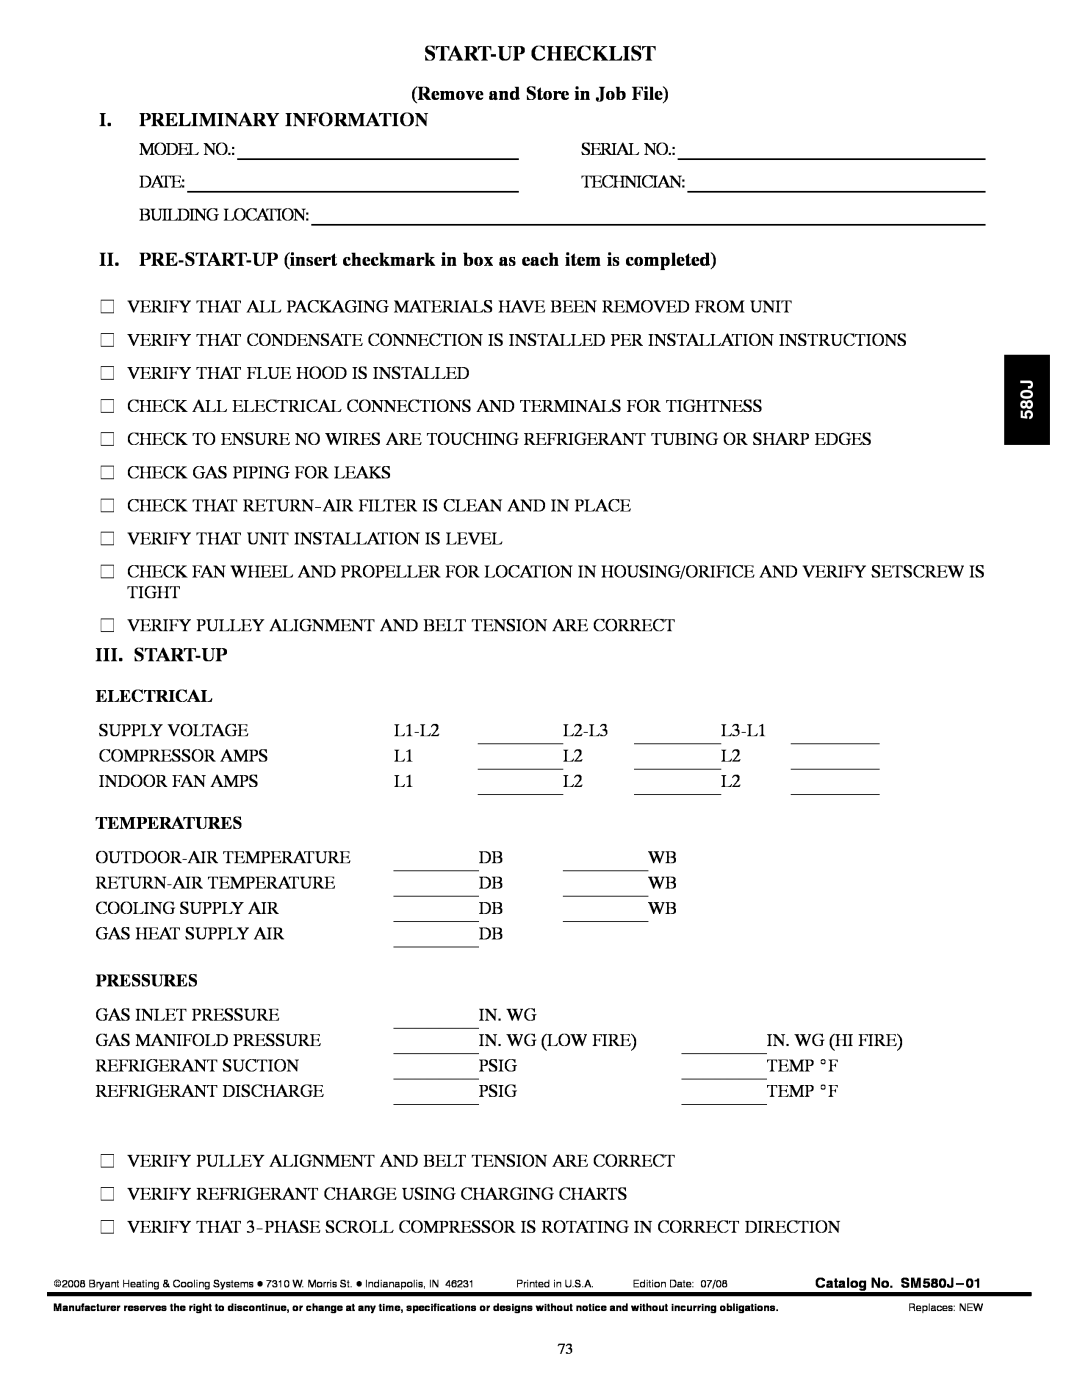 Bryant 580J*04--12 Start-Upchecklist, Remove and Store in Job File, I.Preliminary Information, Iii. Start-Up, Electrical 